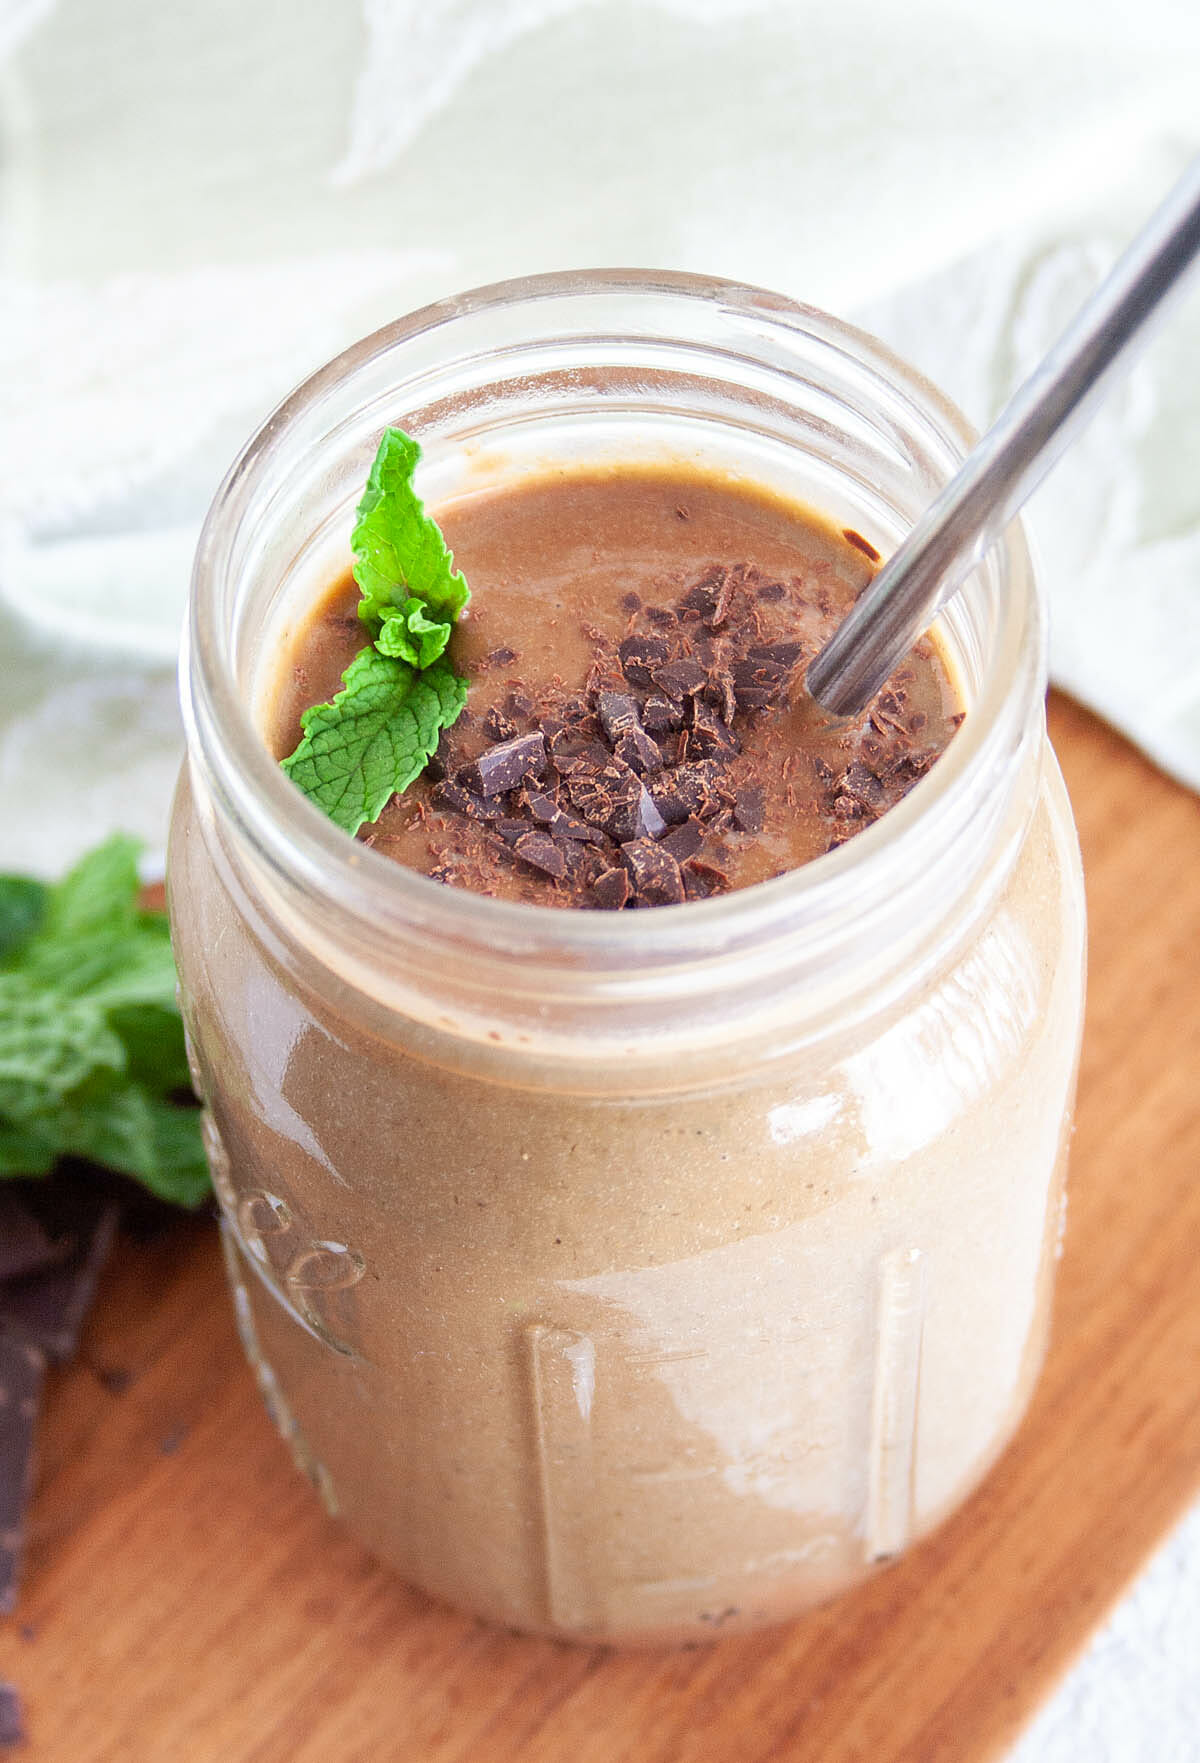 Smoothie with mint leaves and chopped dark chocolate.